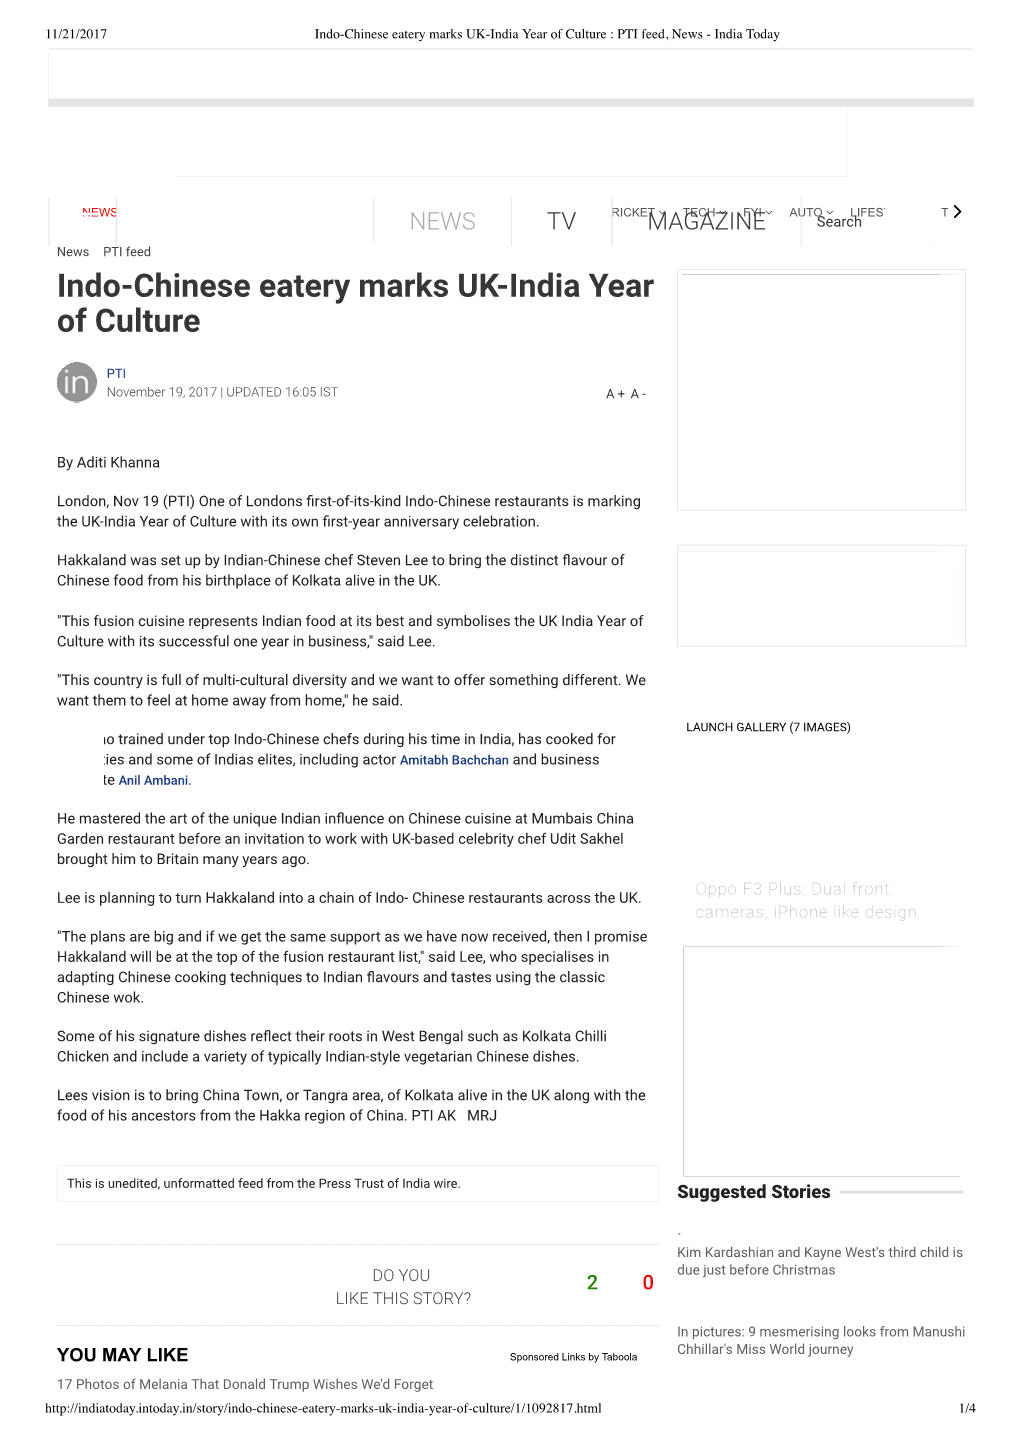 India Today Indo-Chinese Eatery Marks UK-India Year of Culture